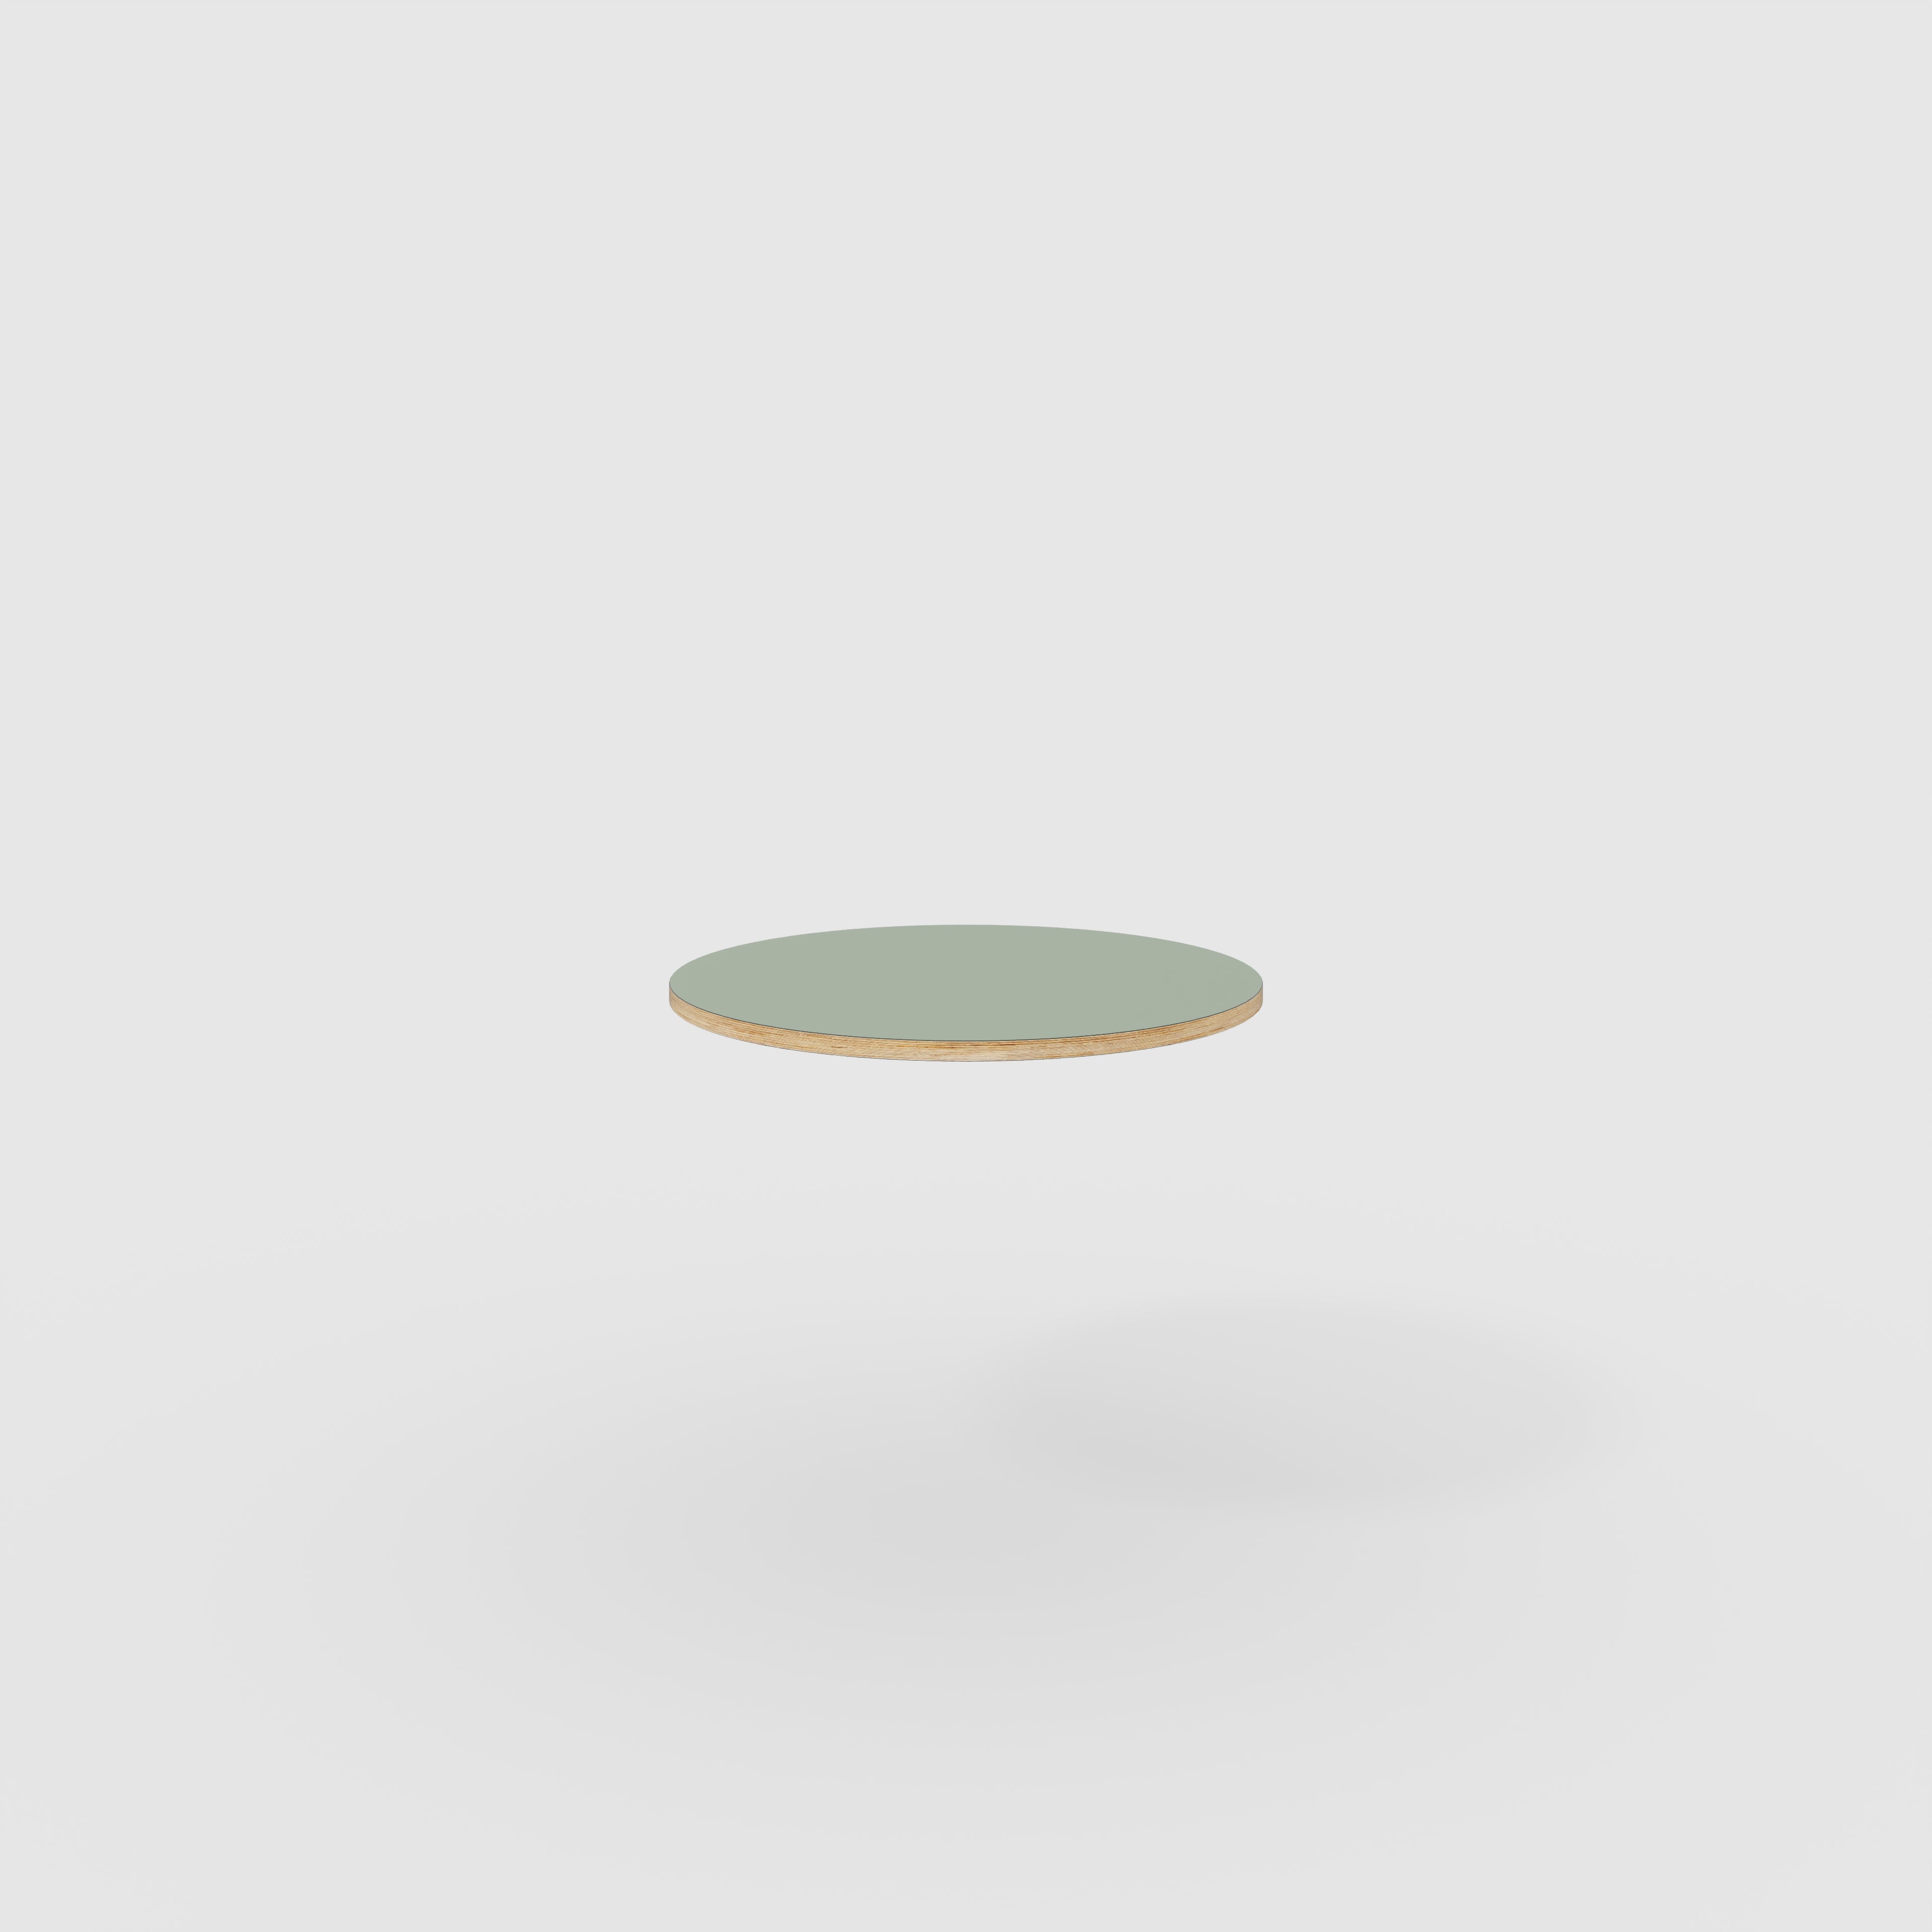 Plywood Round Tabletop - Formica Green Slate - 800(dia)